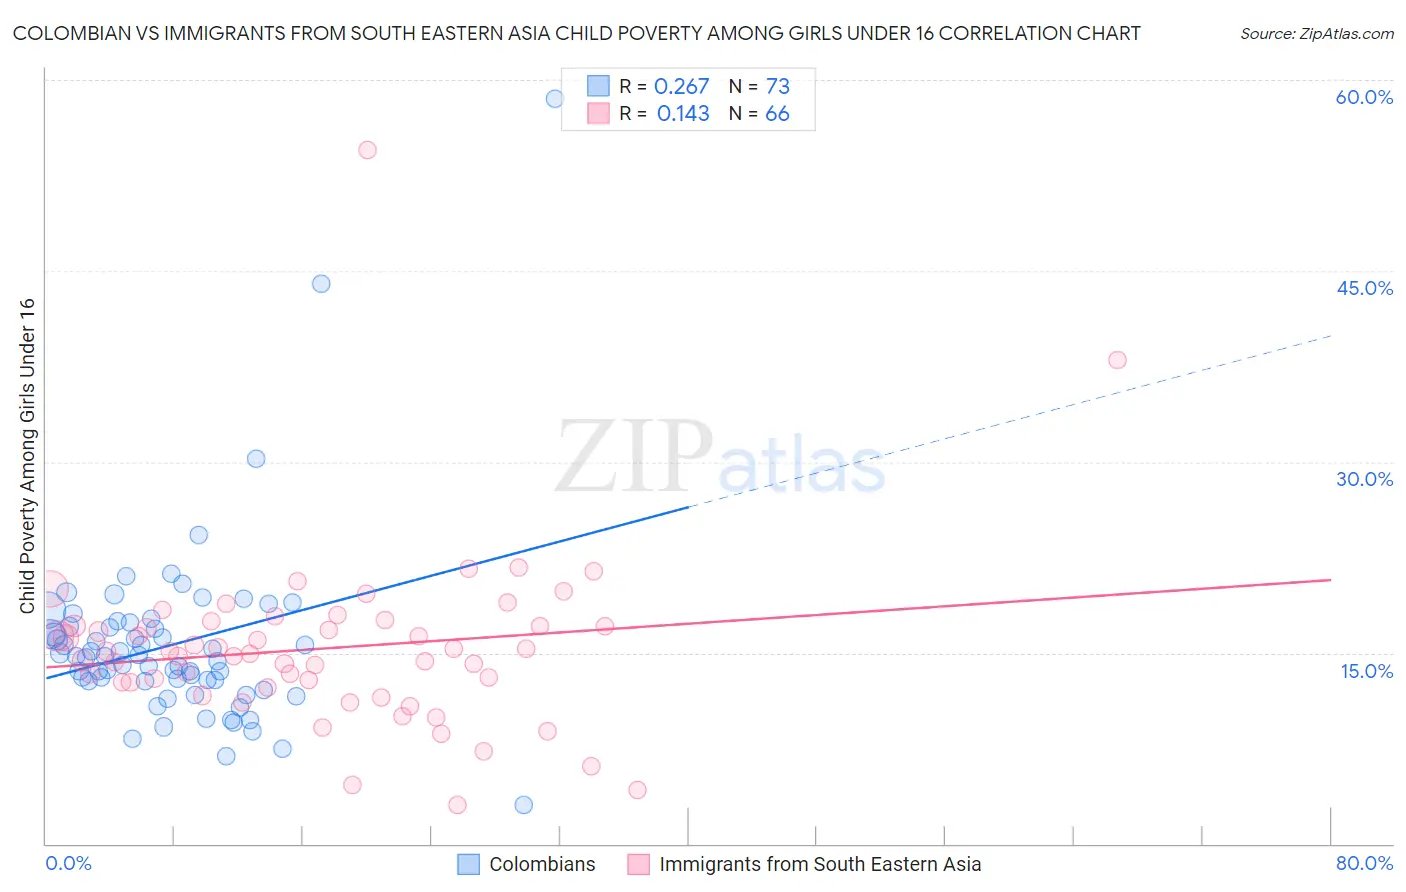 Colombian vs Immigrants from South Eastern Asia Child Poverty Among Girls Under 16